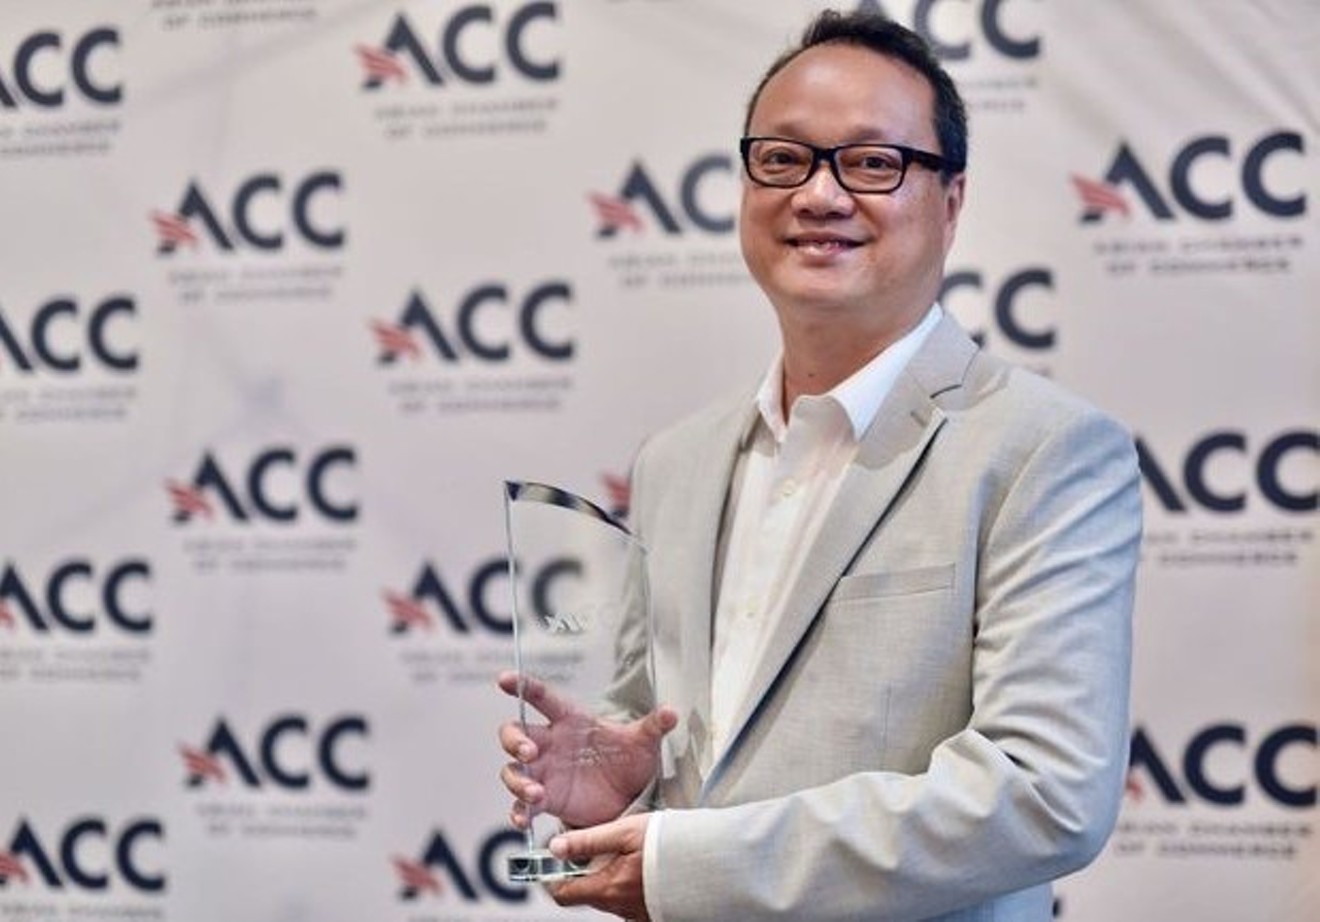 Chef Alex Au-Yeung was honored by the Asian American Chamber of Commerce for his contributions as a business owner.